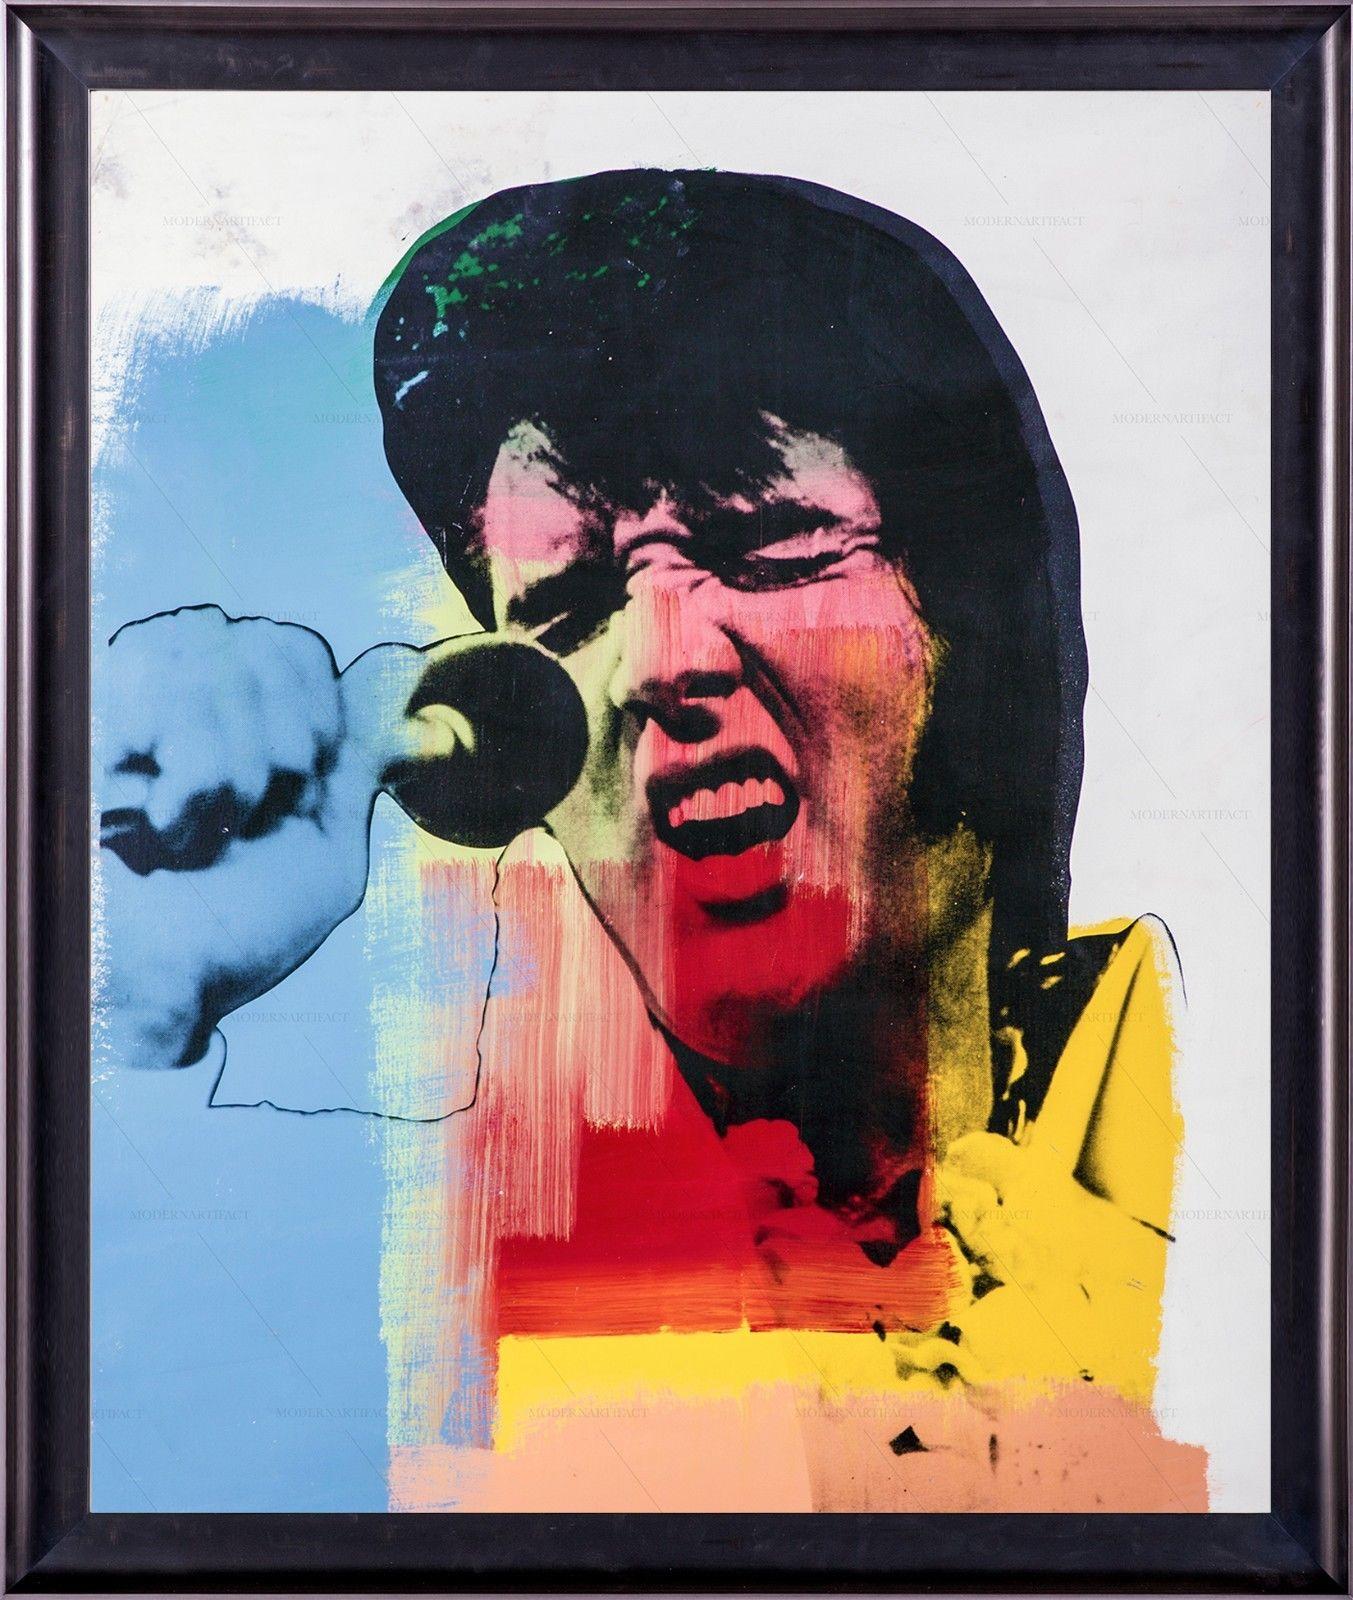 Artist: Steve Kaufman
Title: Elvis
Medium: Original Oil Painting on Screen print Canvas
Size: 40' x 40'
Size Framed:48' x 48'' 
Edition size: Unique meaning there may have been up to five created, but never a series. Hand signed on the verso and